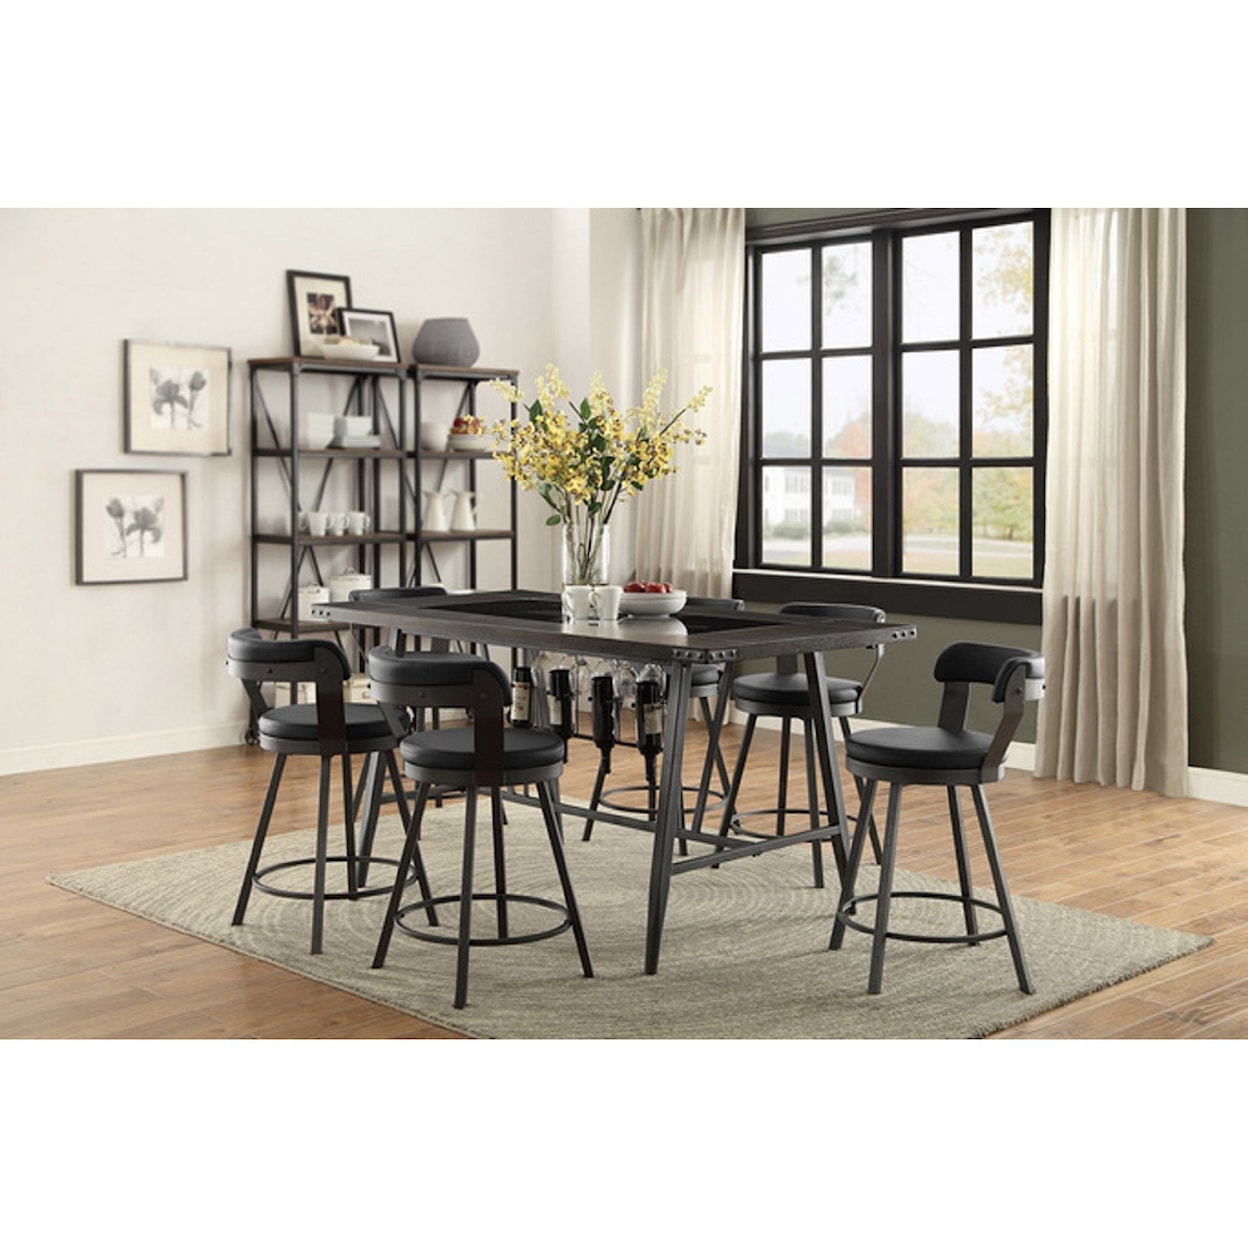 Homelegance Furniture 5566 Counter Height Table